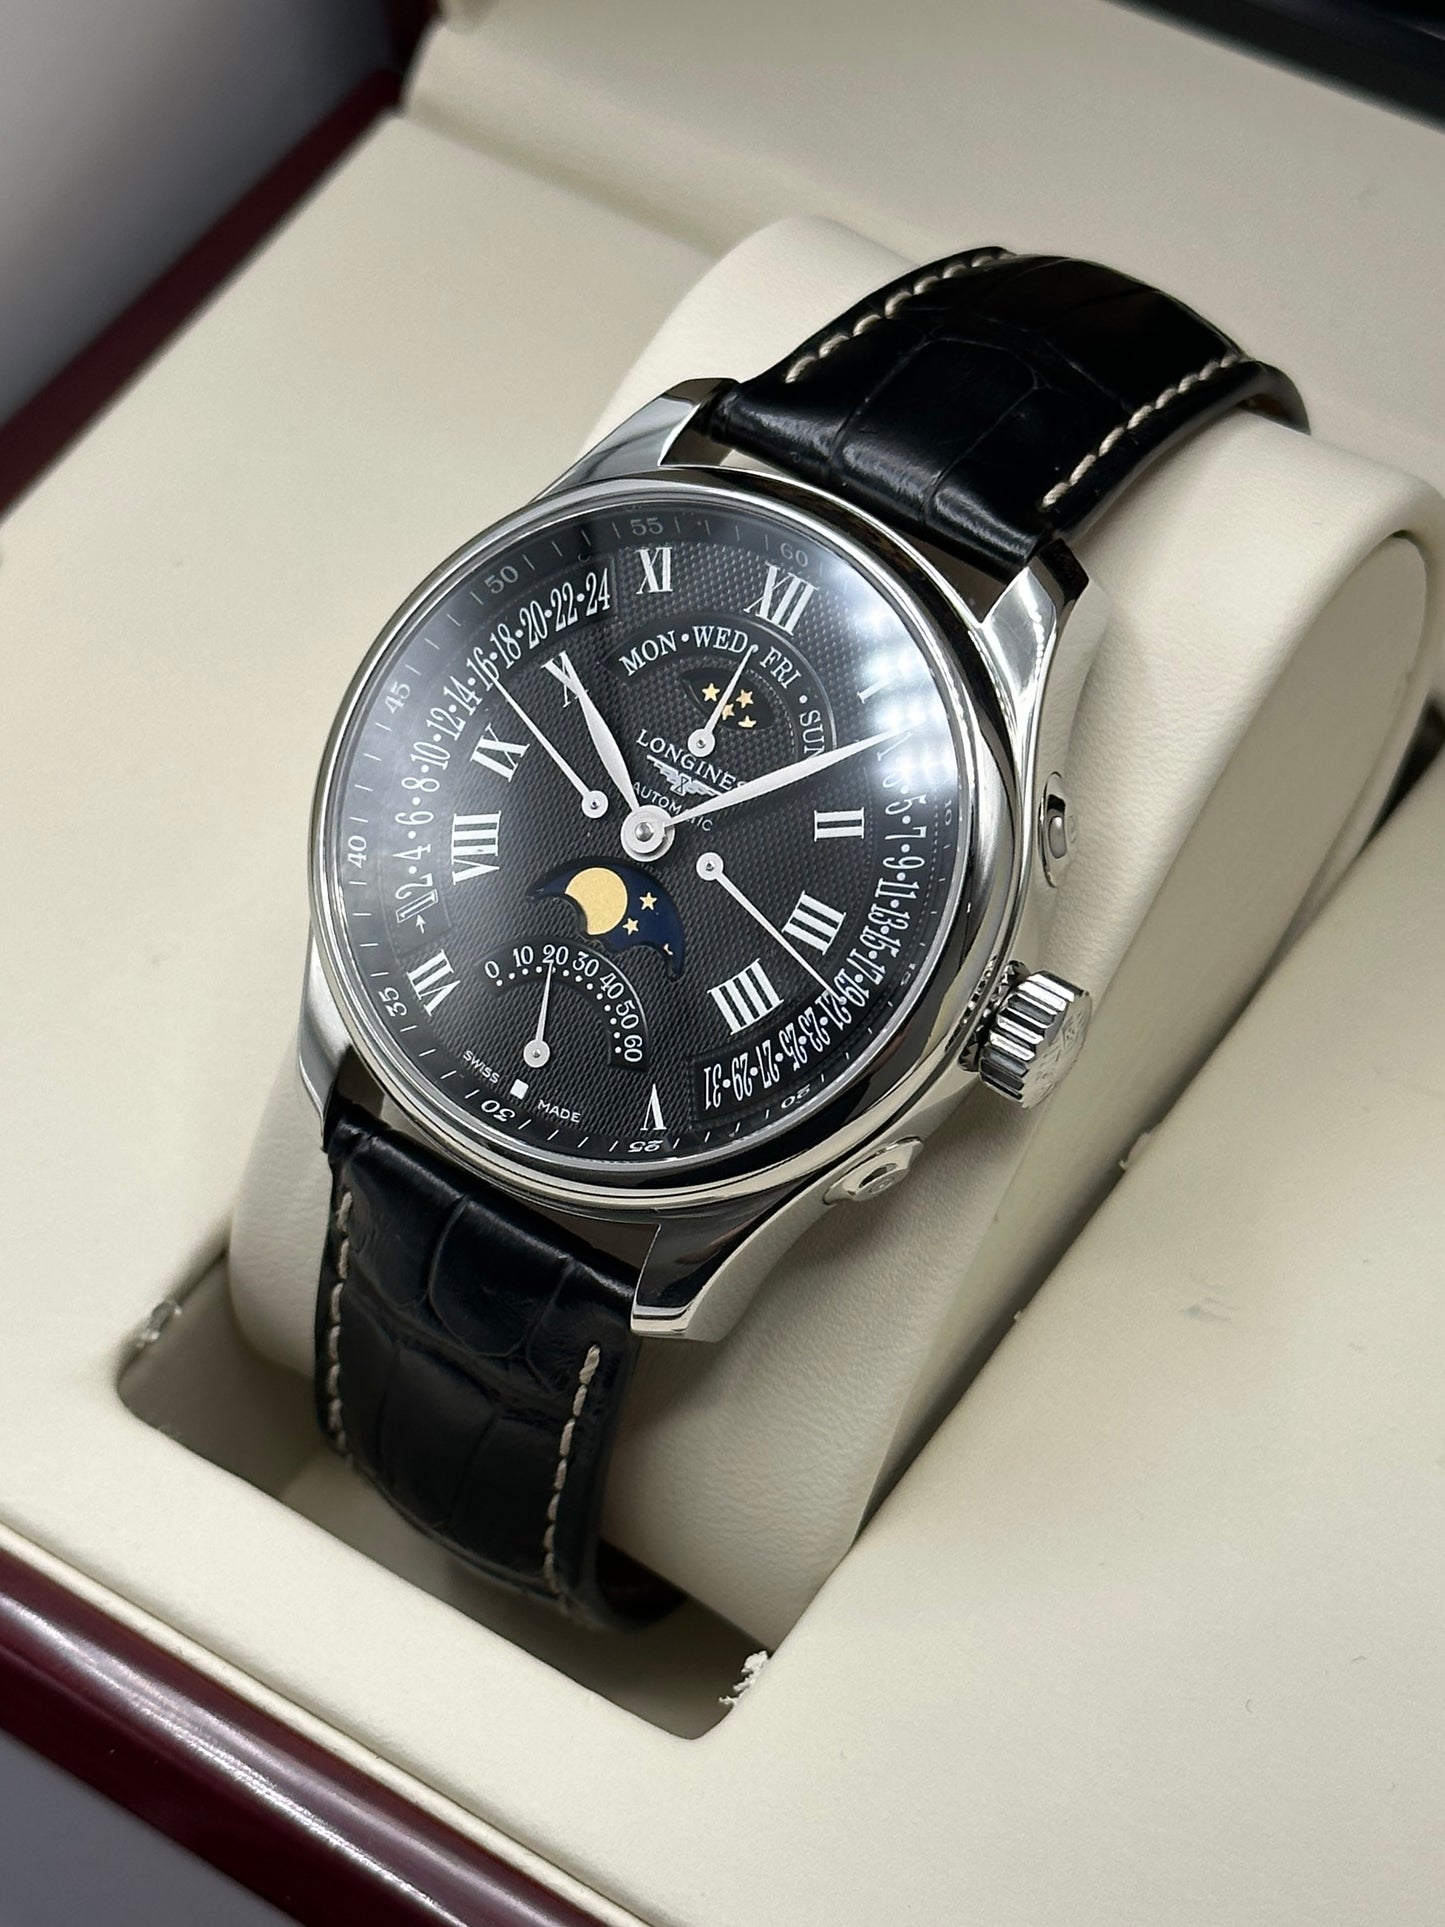 2017 Longines L2.739.4.51.6 Master Moonphase GMT - MyWatchLLC